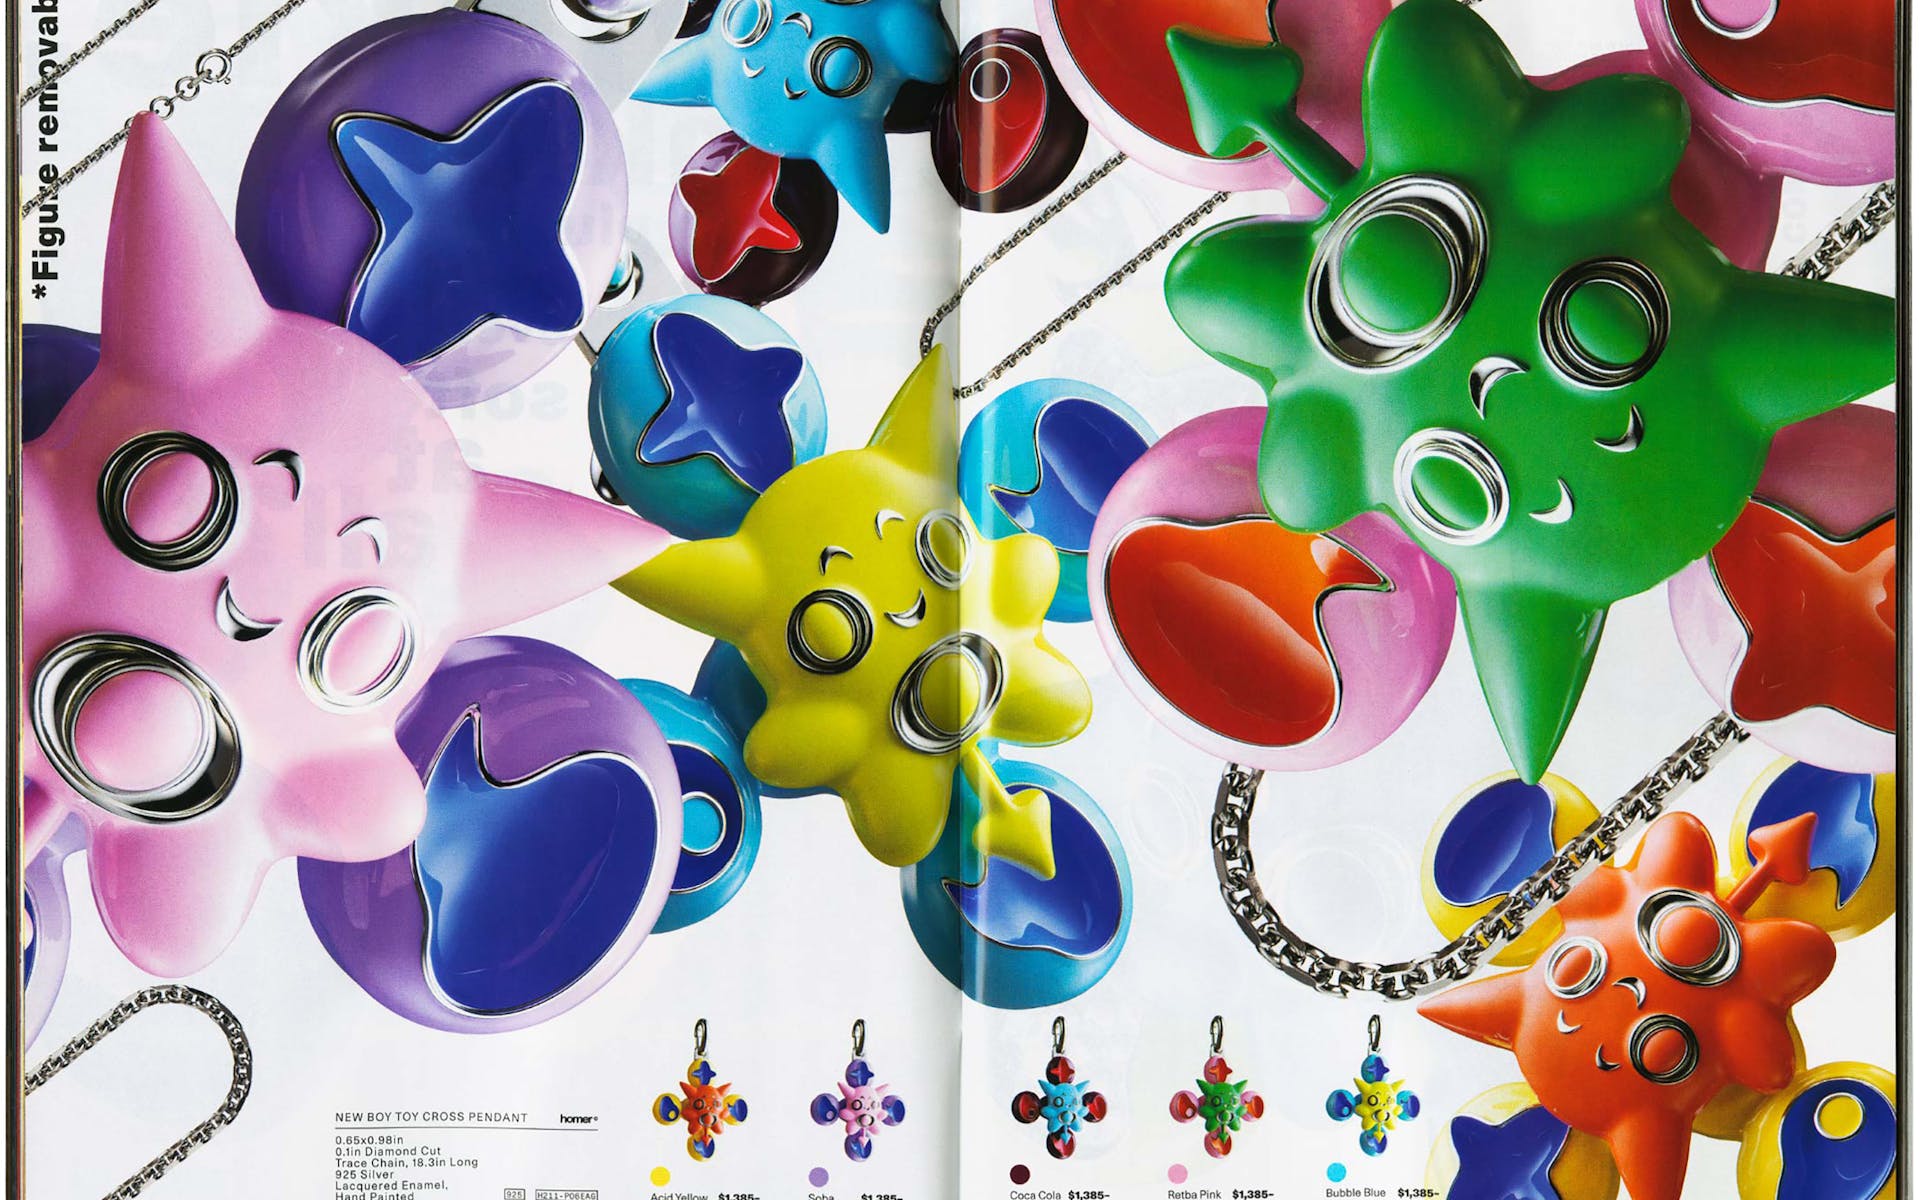 Magazine spread featuring multicolored blog shapes and jewelry